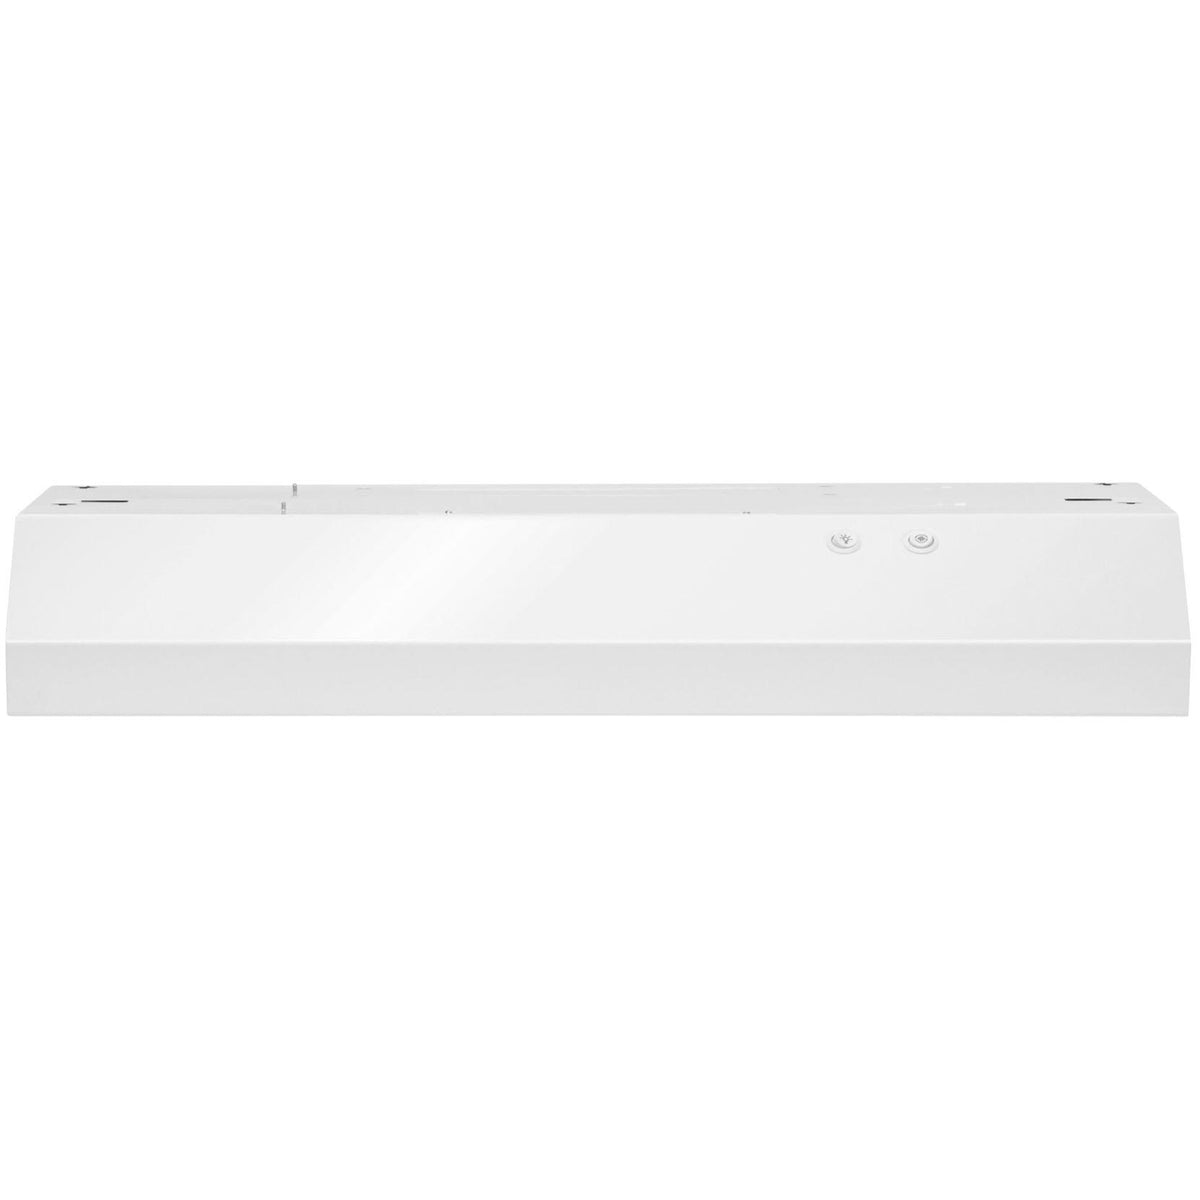 30-inch Under-Cabinet Hood Shell with LED Lighting WVU17UC0JW IMAGE 1